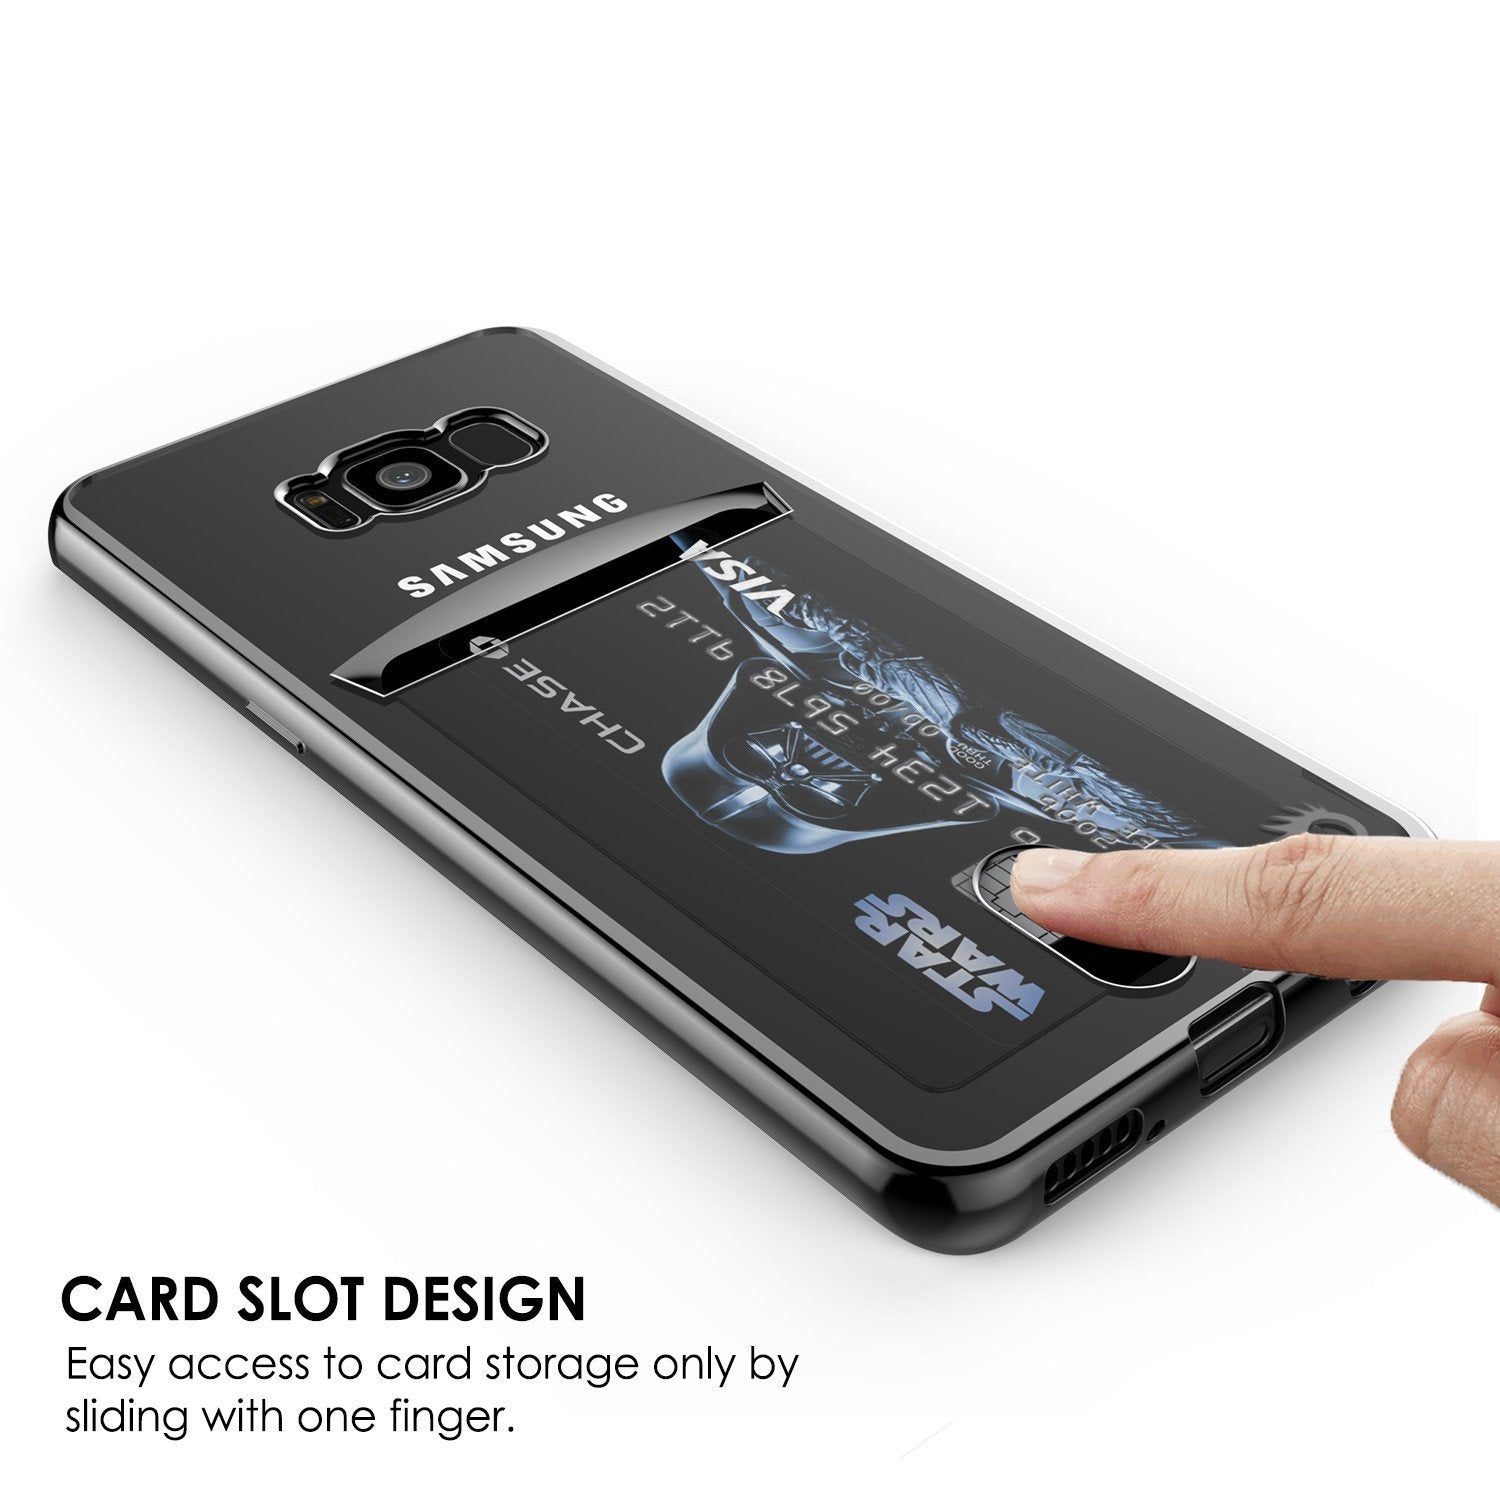 Galaxy S8 Plus Case, PUNKCASE® LUCID Black Series | Card Slot | SHIELD Screen Protector | Ultra fit - PunkCase NZ